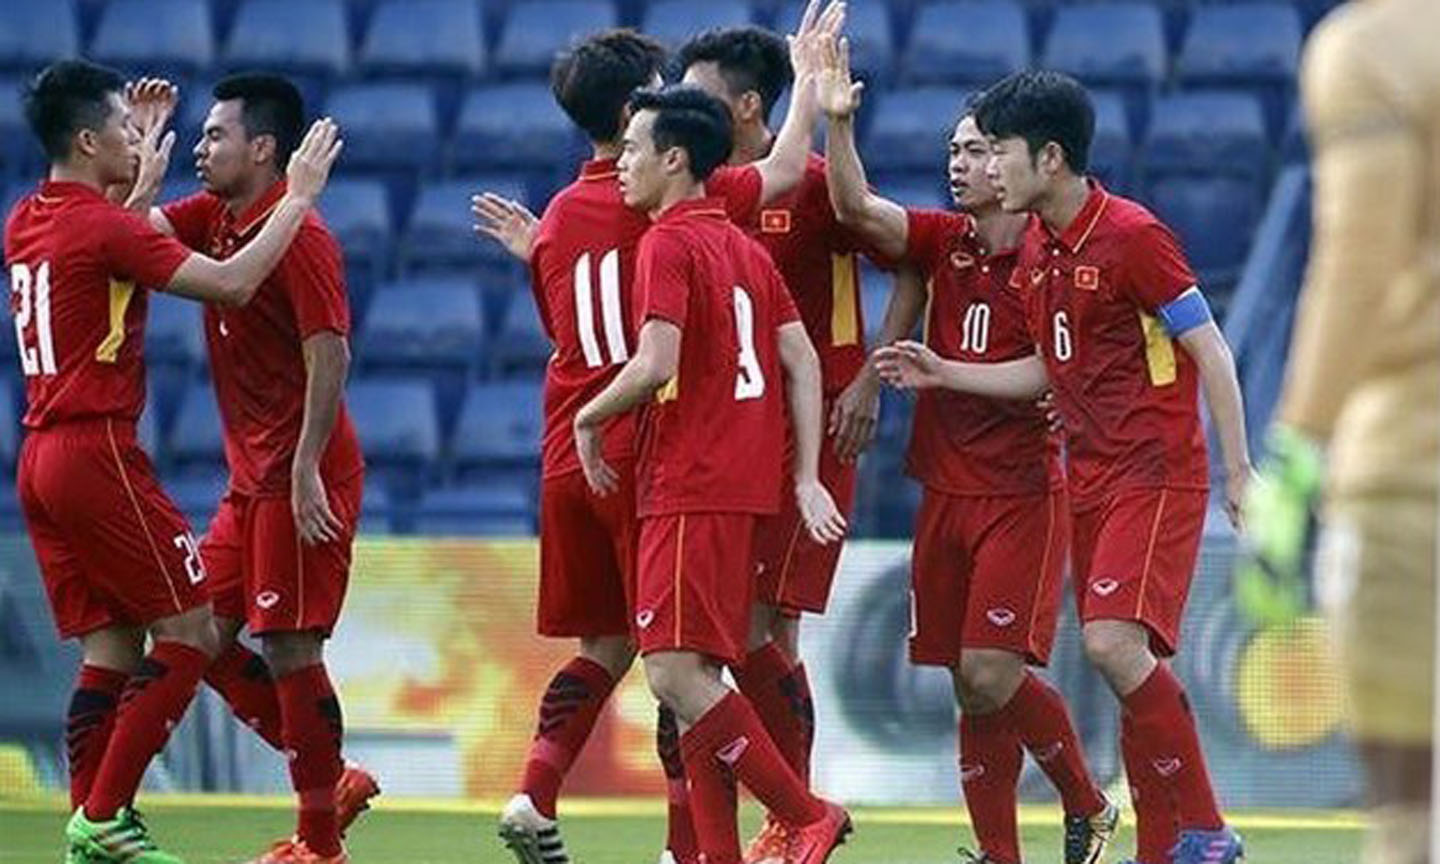 Vietnam's national team will play Thailand in the opening match of the 2019 King's Cup in June (Photo: plo.vn)